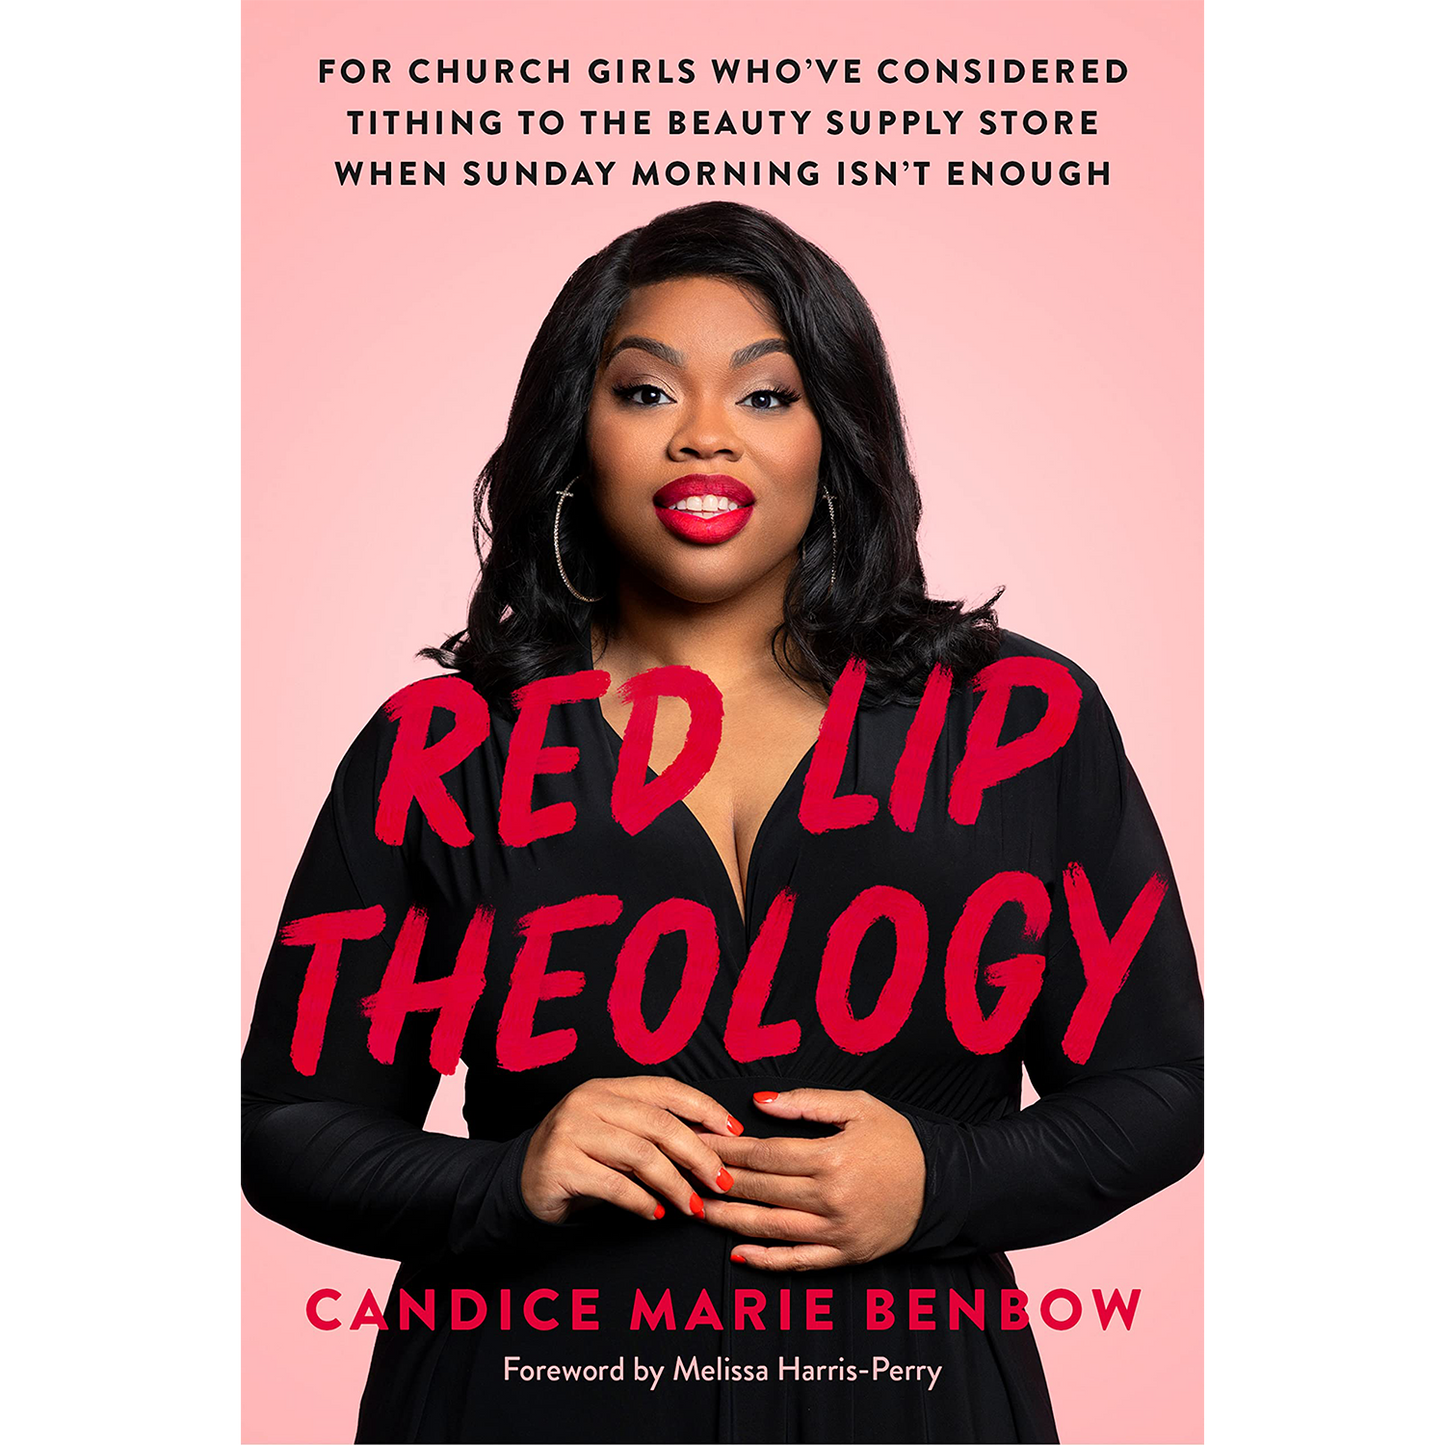 Red Lip Theology: For Church Girls Who've Considered Tithing to the Beauty Supply Store When Sunday Morning Isn't Enough Hardcover